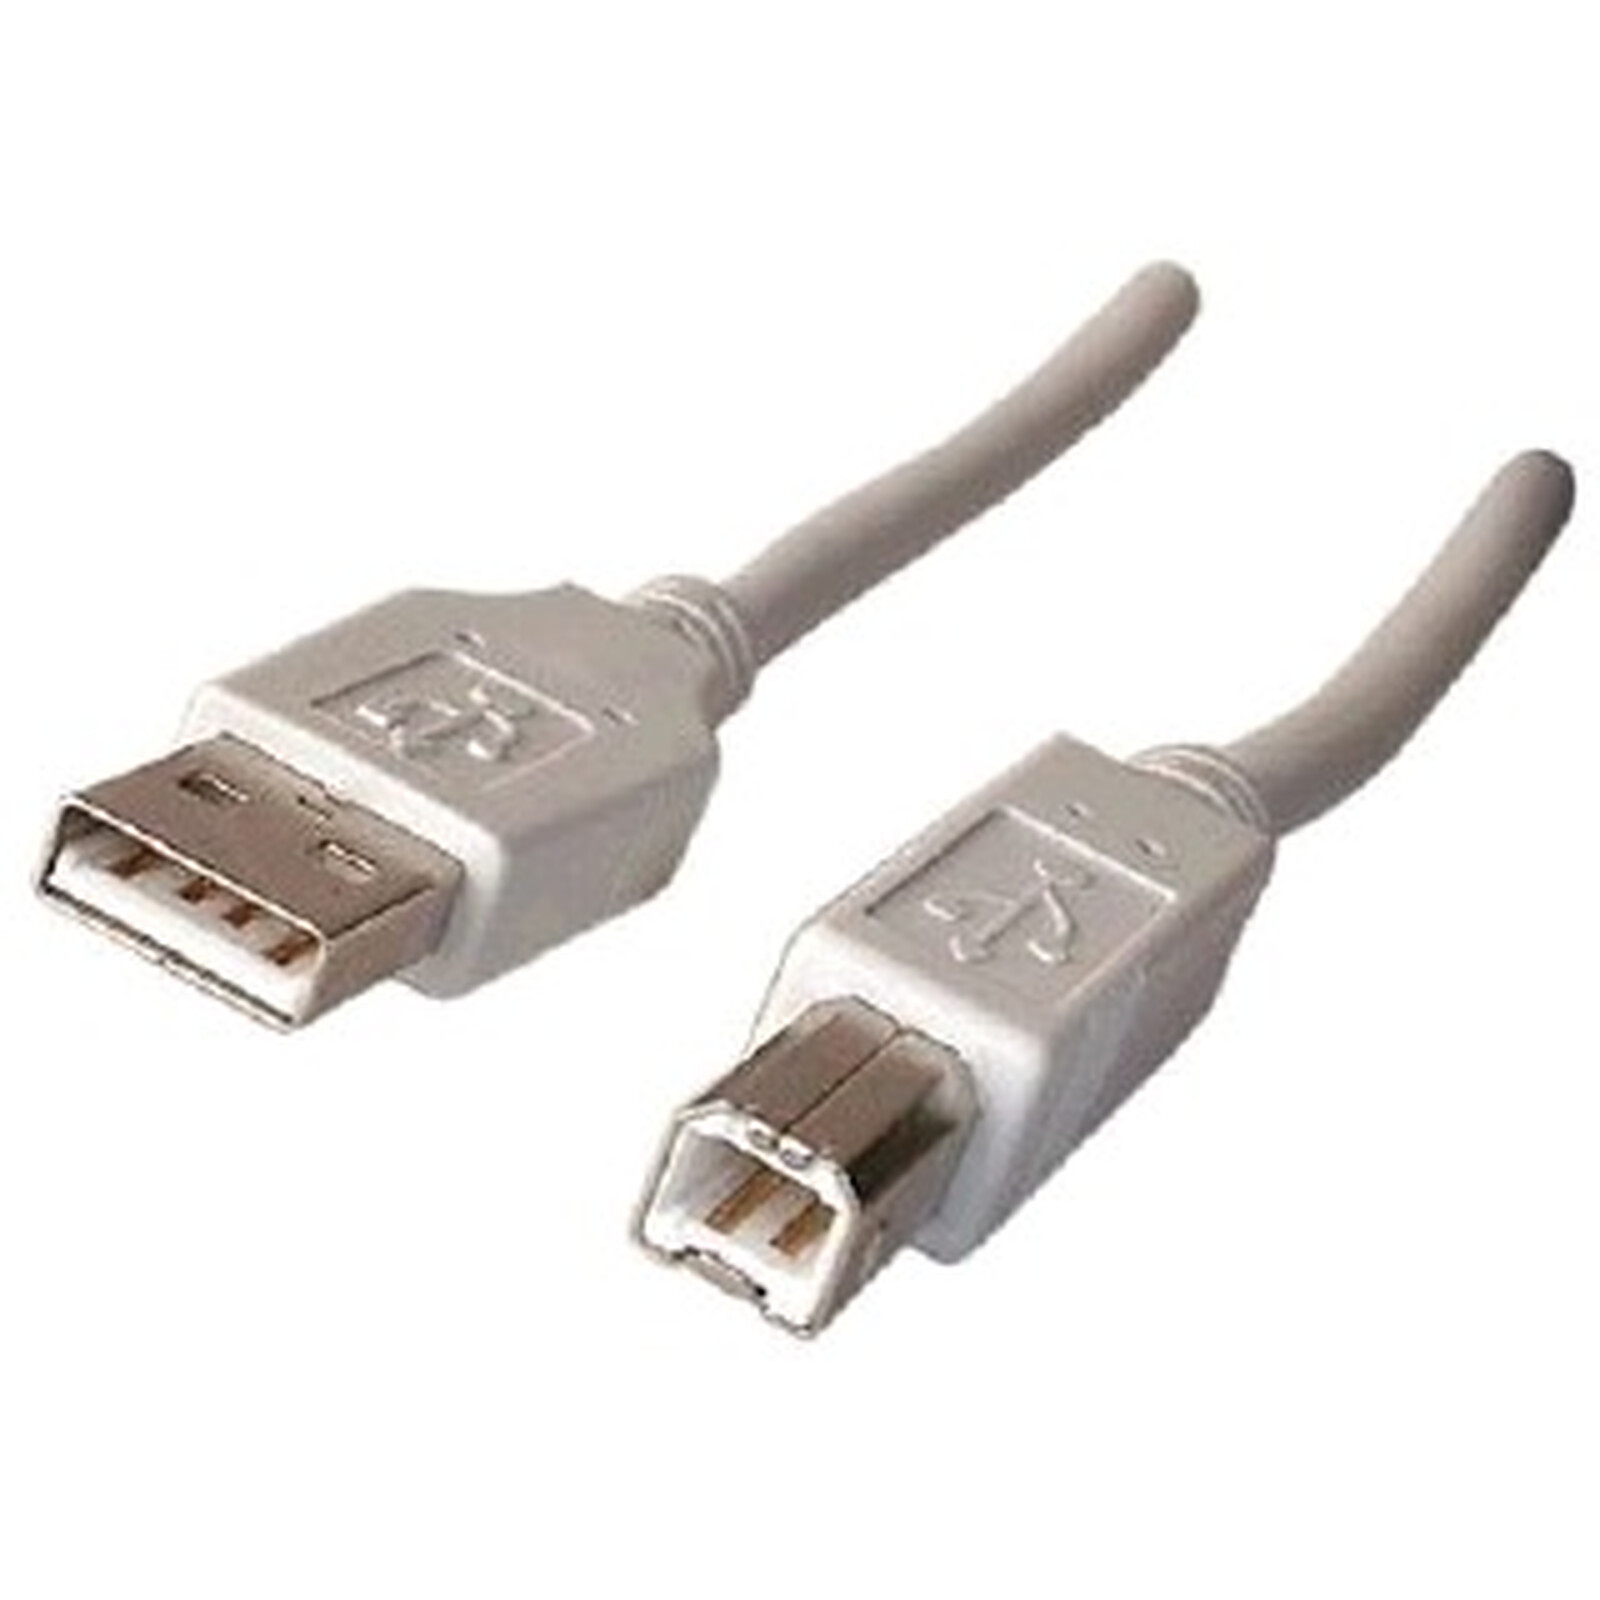 Usb 2.0 A-B and A-A Device Cables 